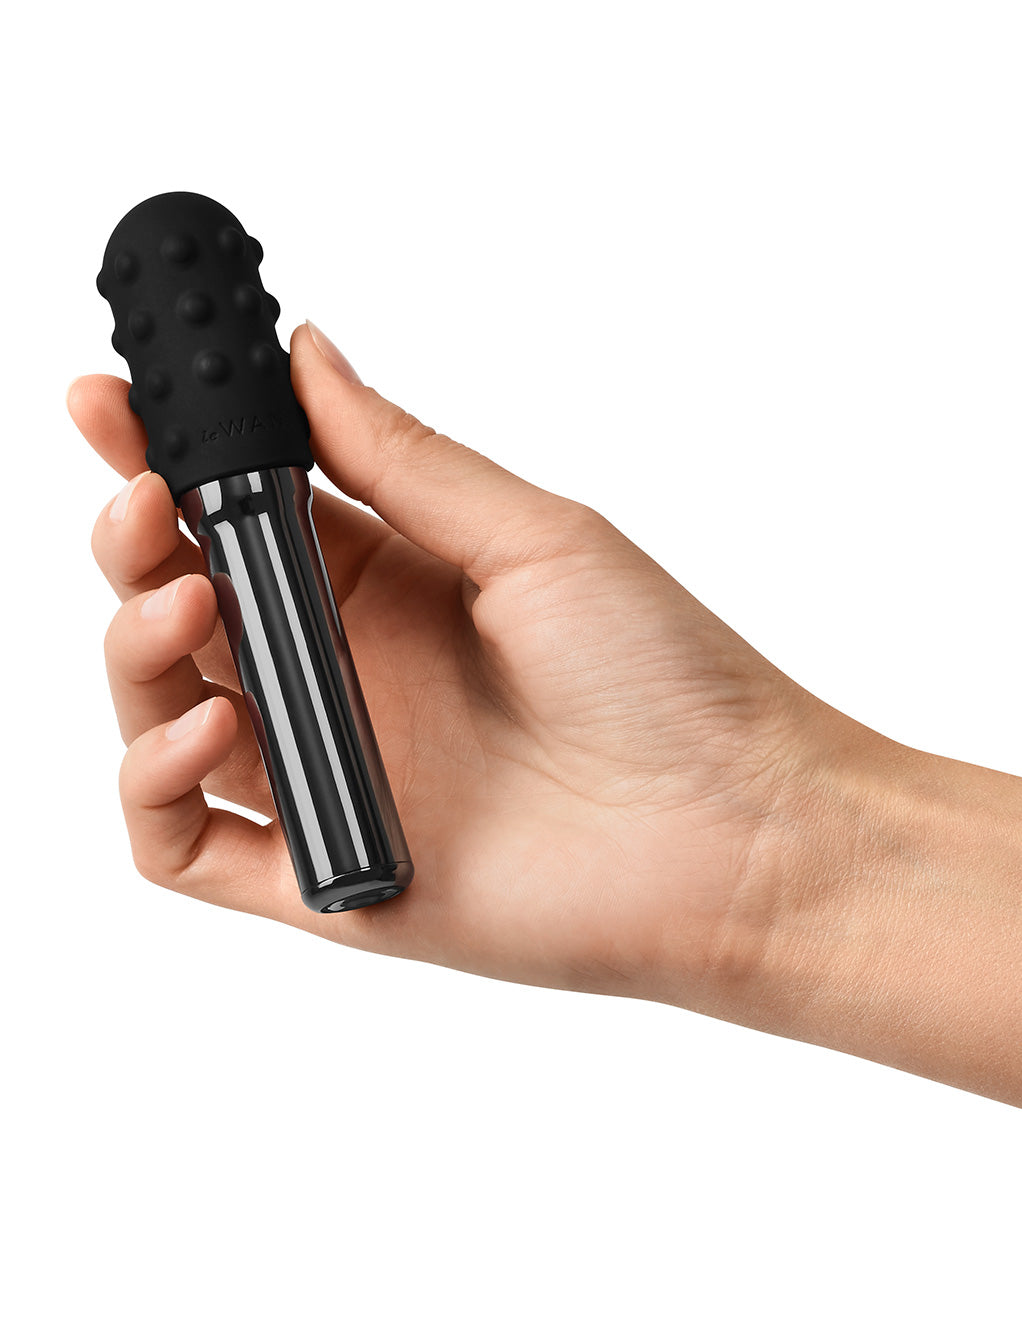 Le Wand Grand Bullet Rechargeable Clitoral Vibrator- Black- In hand